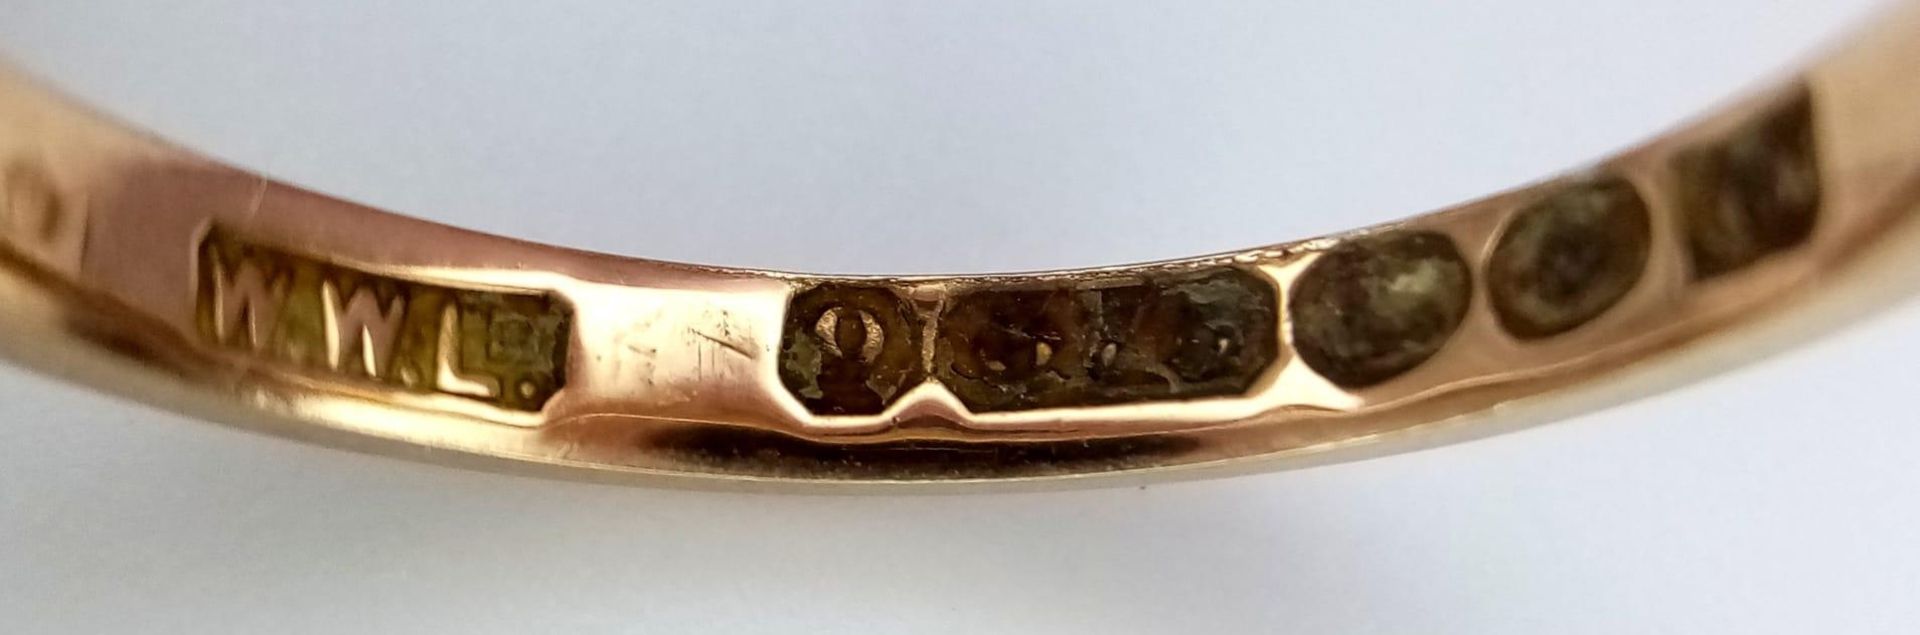 A Vintage 9K Yellow Gold Band Ring. Size L. 1.95g weight. - Image 4 of 4